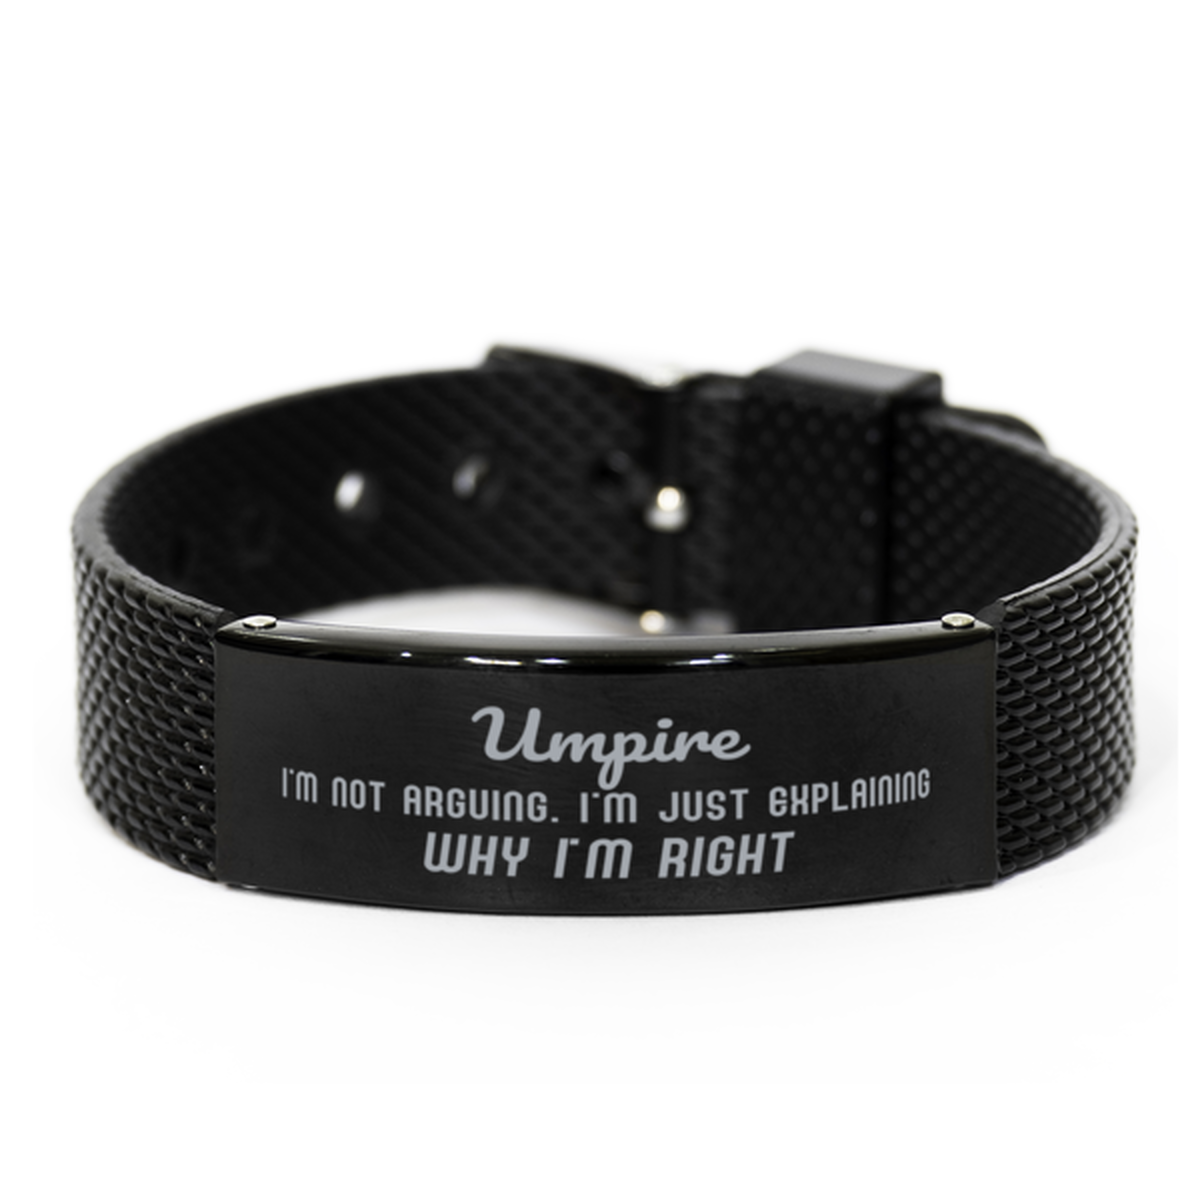 Umpire I'm not Arguing. I'm Just Explaining Why I'm RIGHT Black Shark Mesh Bracelet, Funny Saying Quote Umpire Gifts For Umpire Graduation Birthday Christmas Gifts for Men Women Coworker